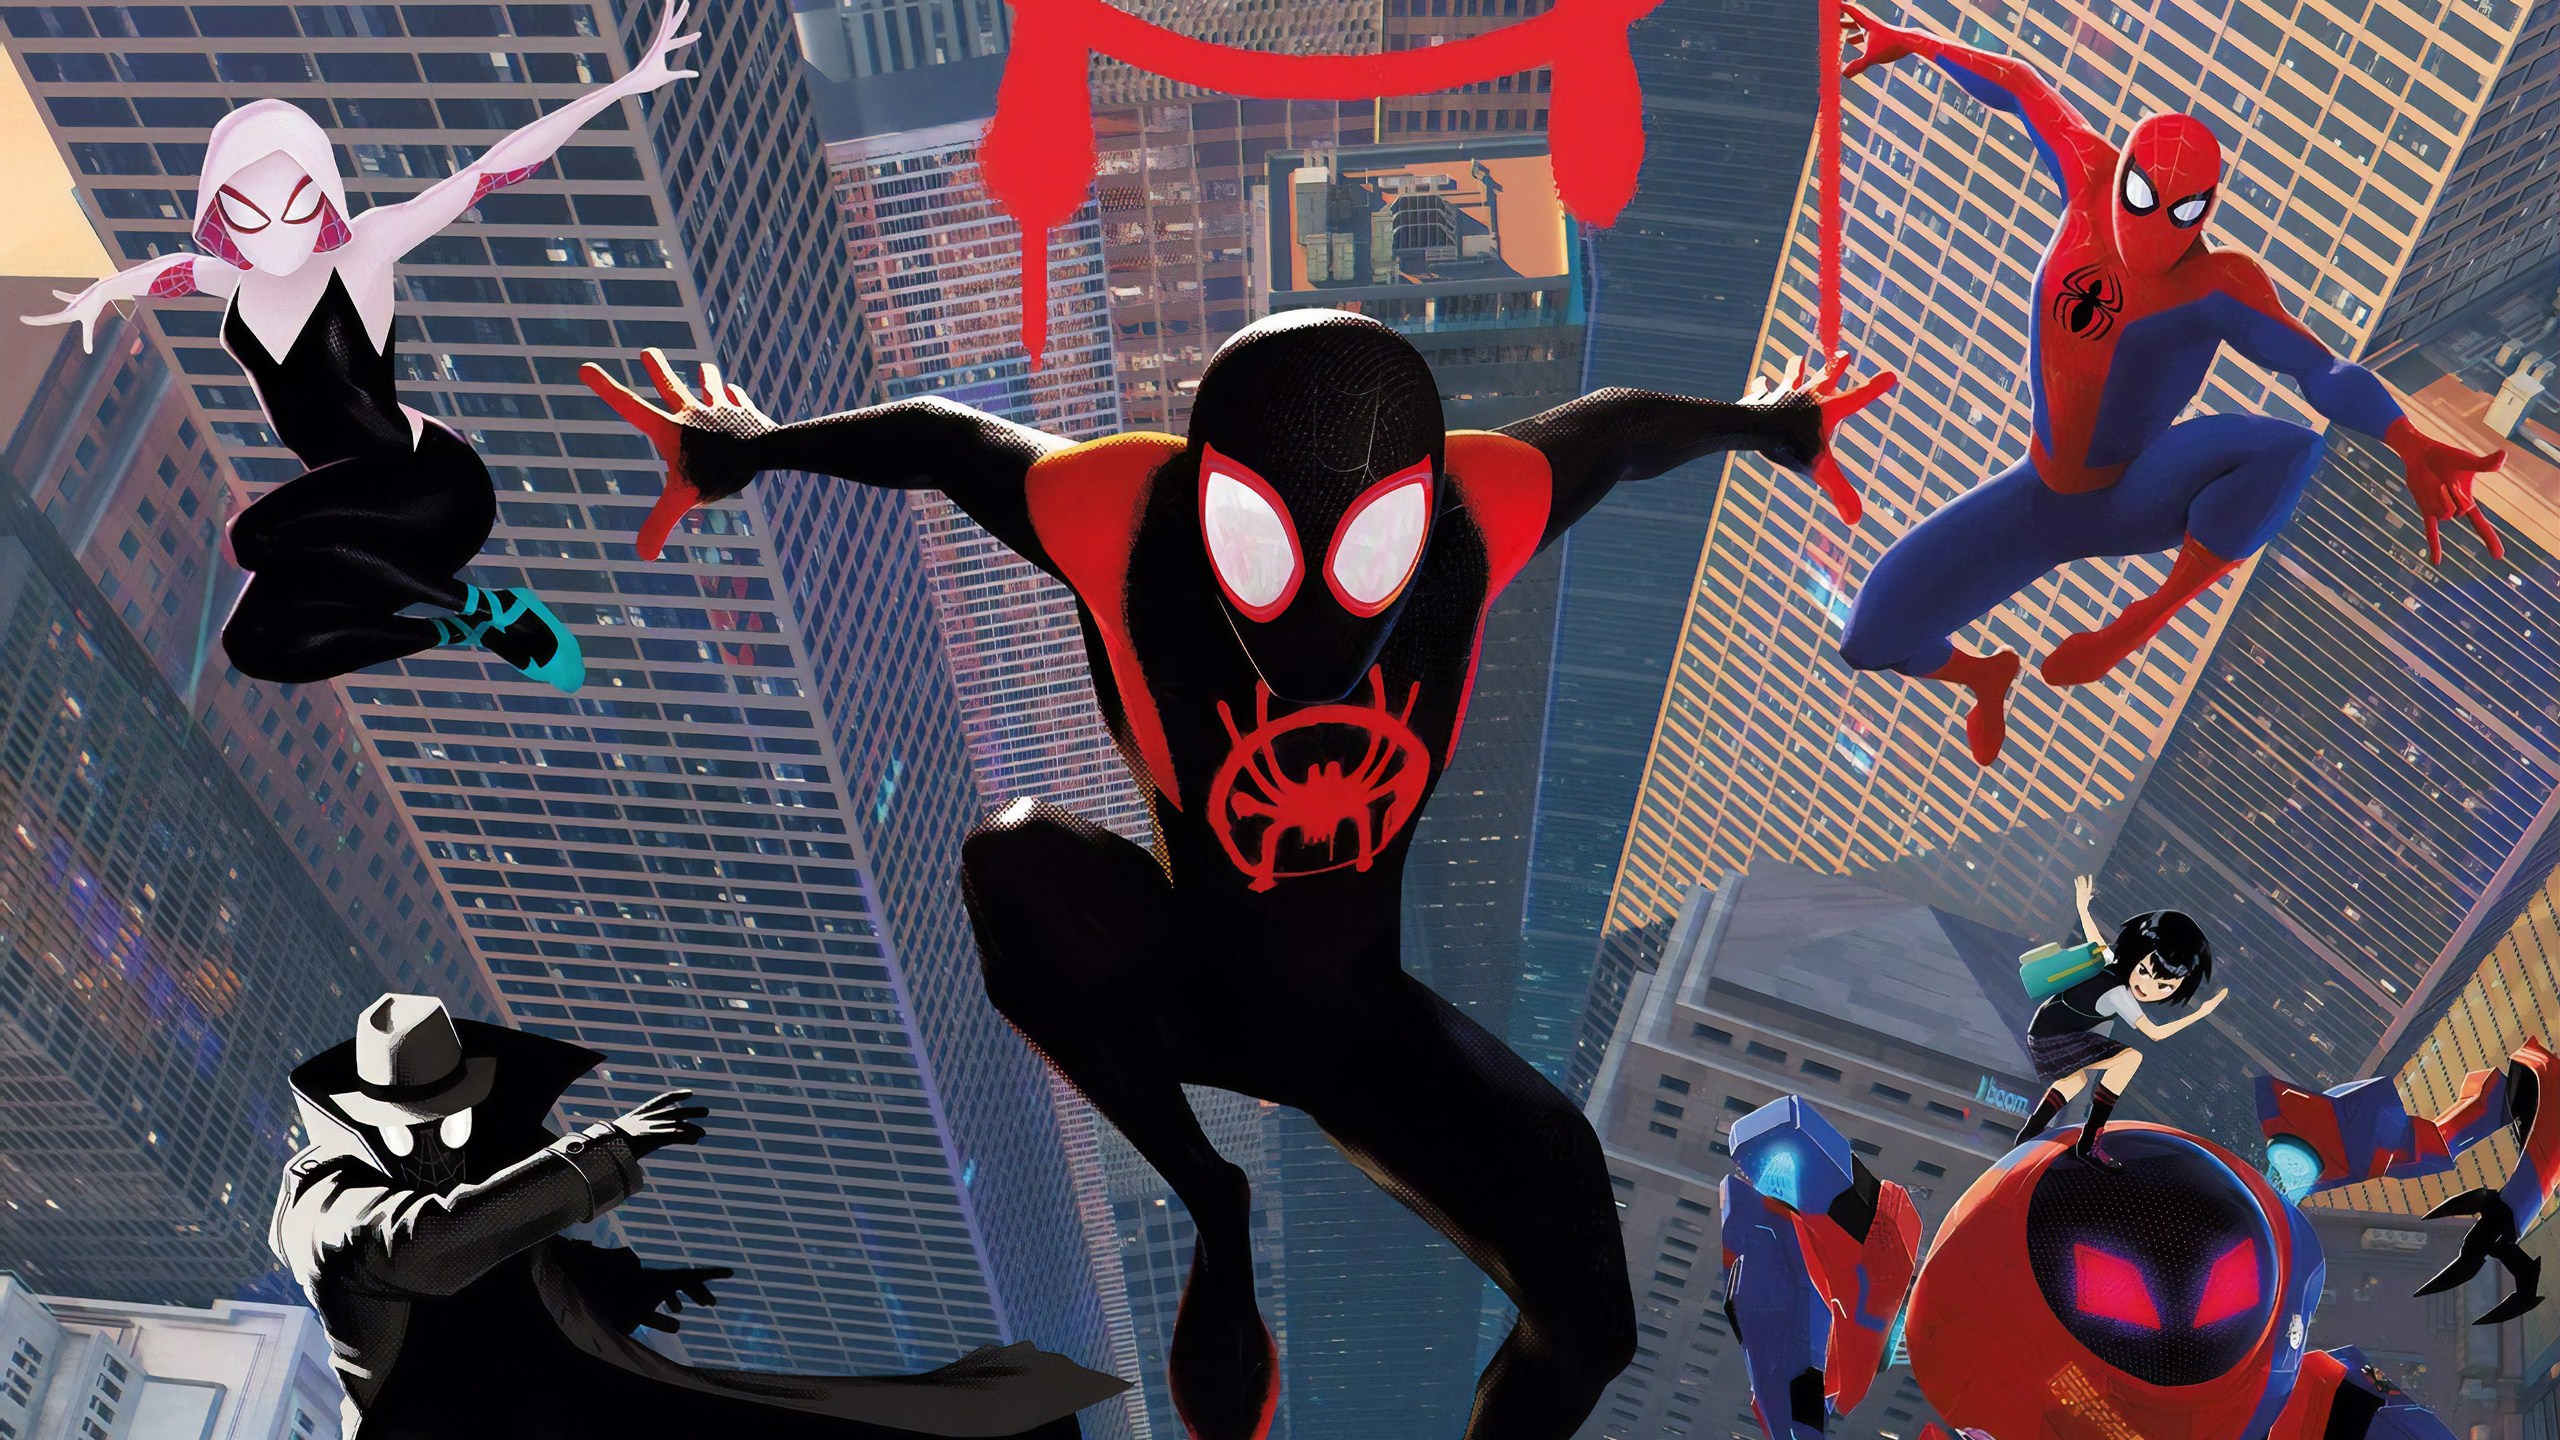 SpiderMan Into The Spider Verse New Poster Art, HD Movies, 4k